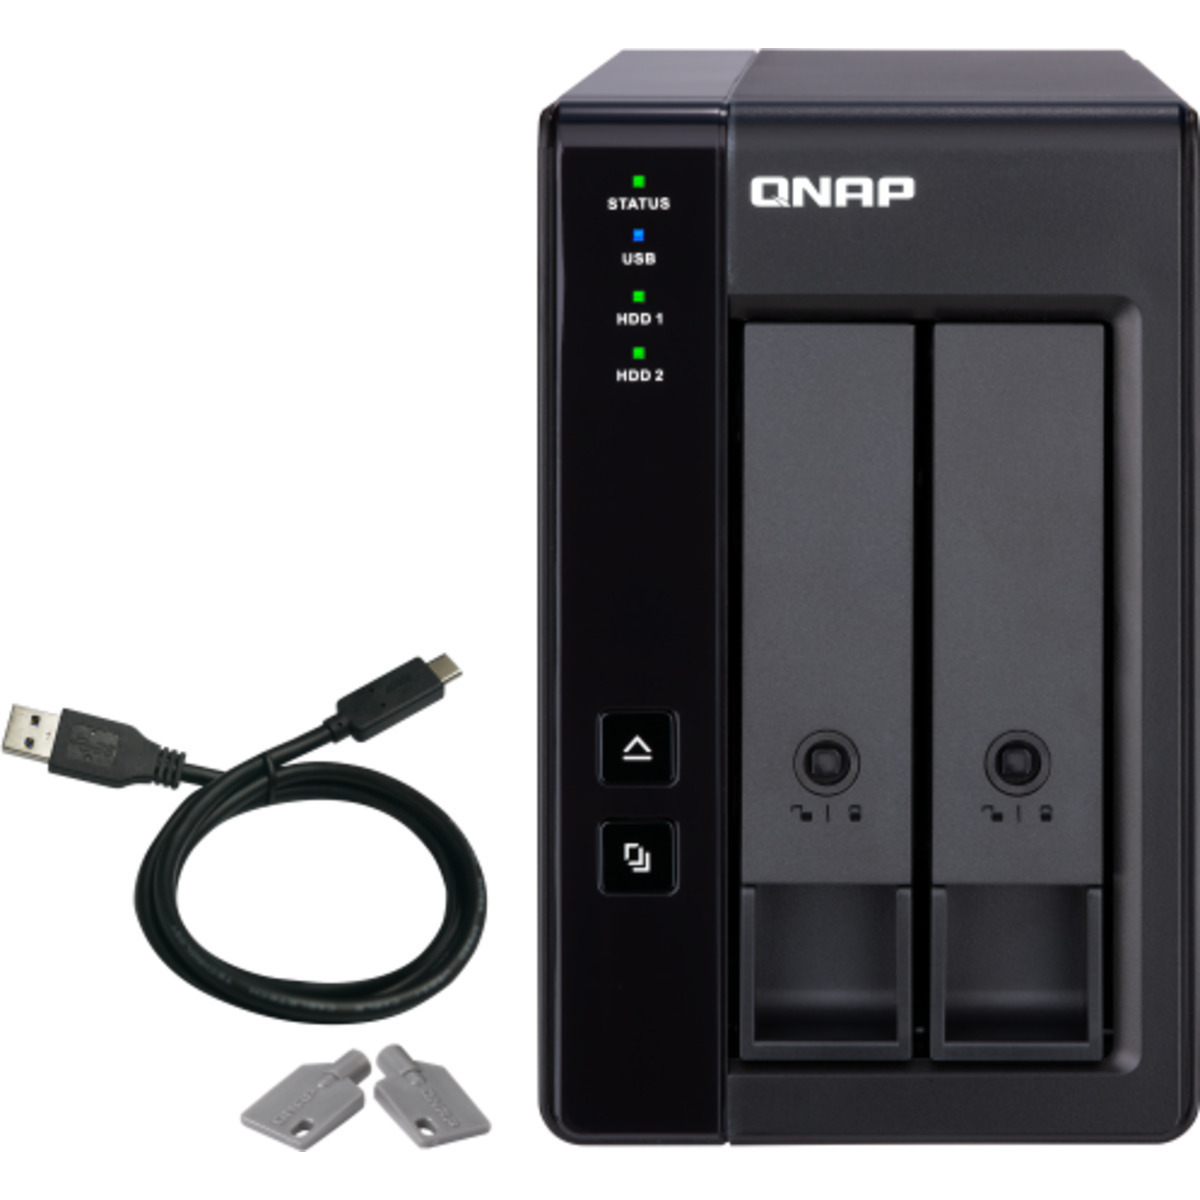 buy QNAP TR-002 External Expansion Drive 4tb Desktop Expansion Enclosure 2x2000gb Seagate IronWolf Pro ST2000NT001 3.5 7200rpm SATA 6Gb/s HDD NAS Class Drives Installed - Burn-In Tested - nas headquarters buy network attached storage server device das new raid-5 free shipping simply usa TR-002 External Expansion Drive